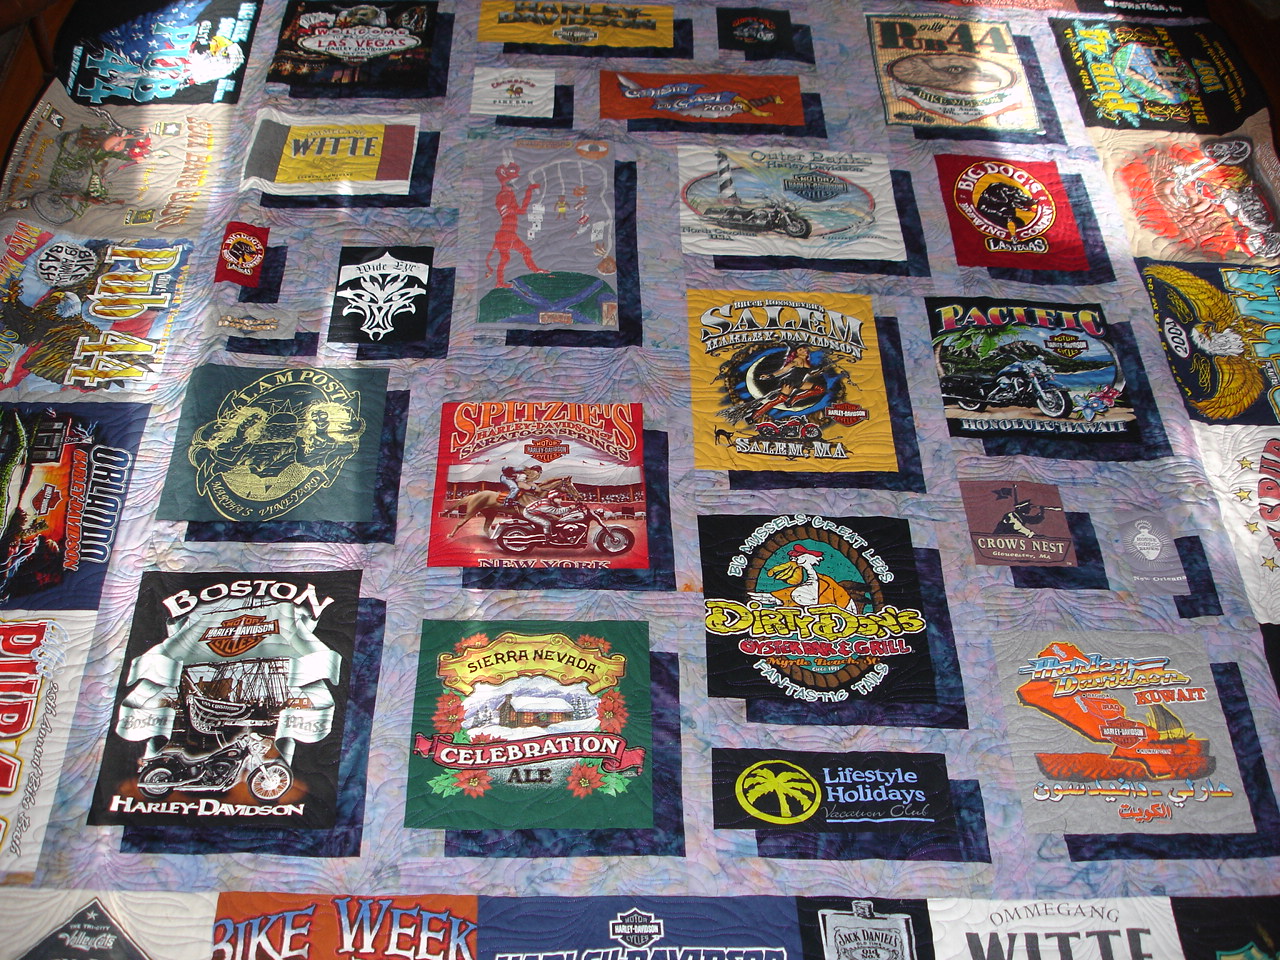 T-shirt Quilts Pricing  Too Cool T-shirt Quilts